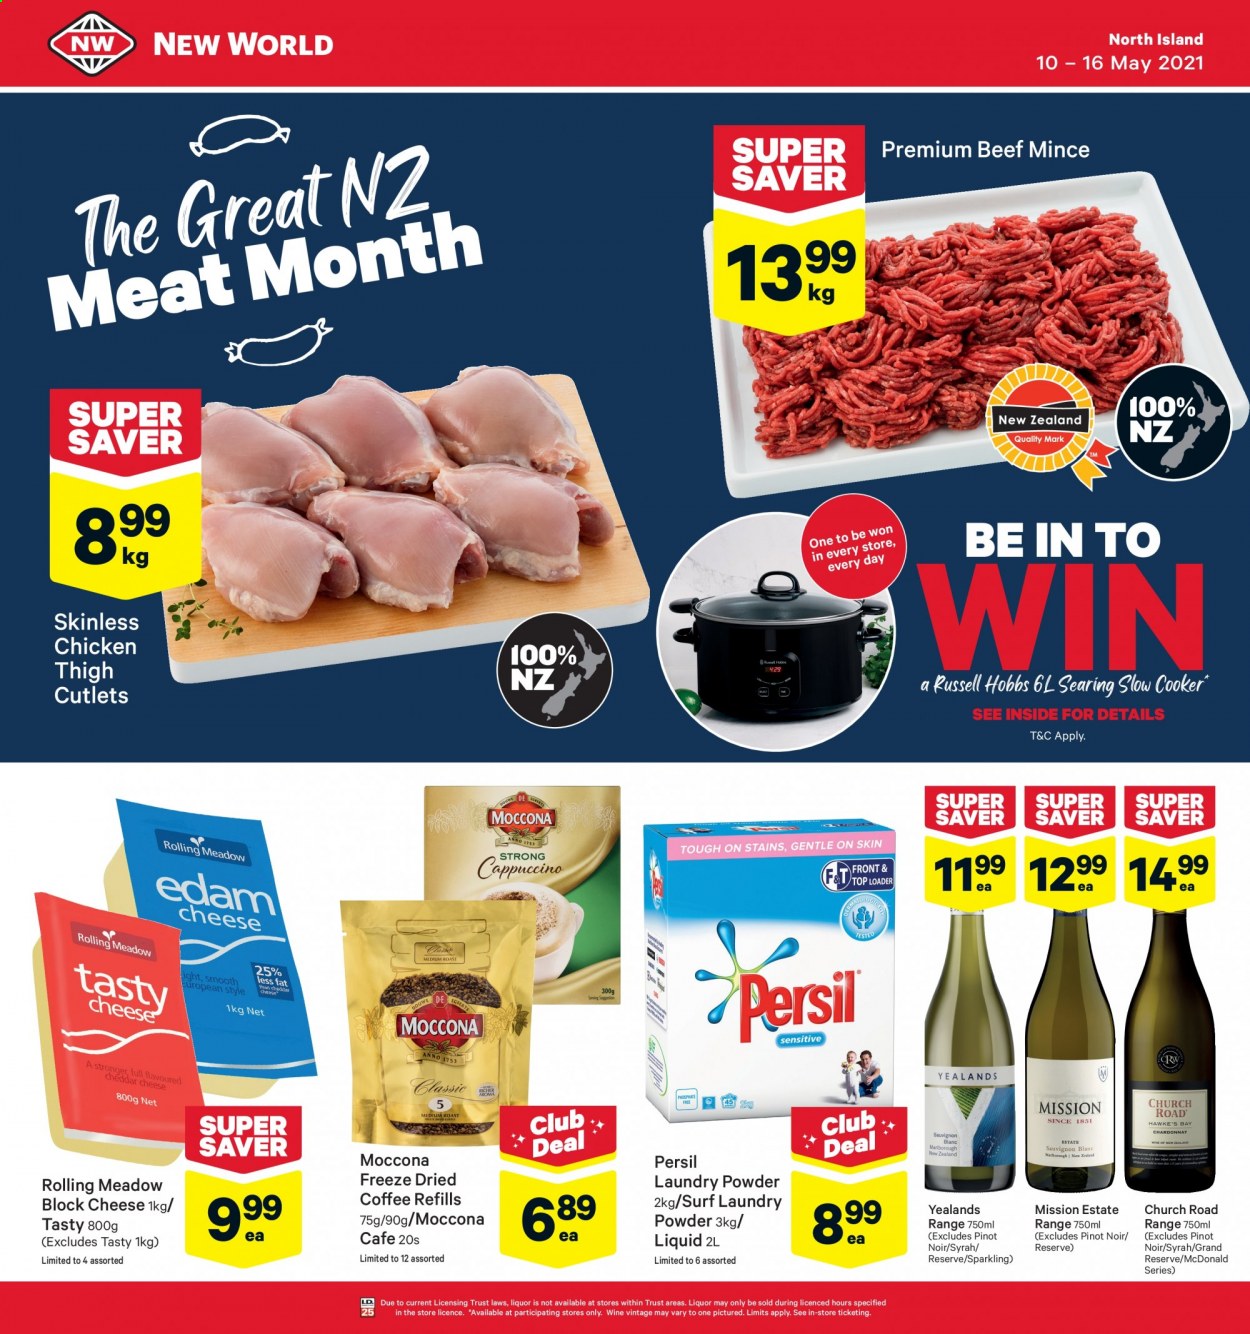 thumbnail - New World mailer - 10.05.2021 - 16.05.2021 - Sales products - cheese, coffee, Moccona, red wine, wine, Pinot Noir, Syrah, beef meat, ground beef. Page 1.